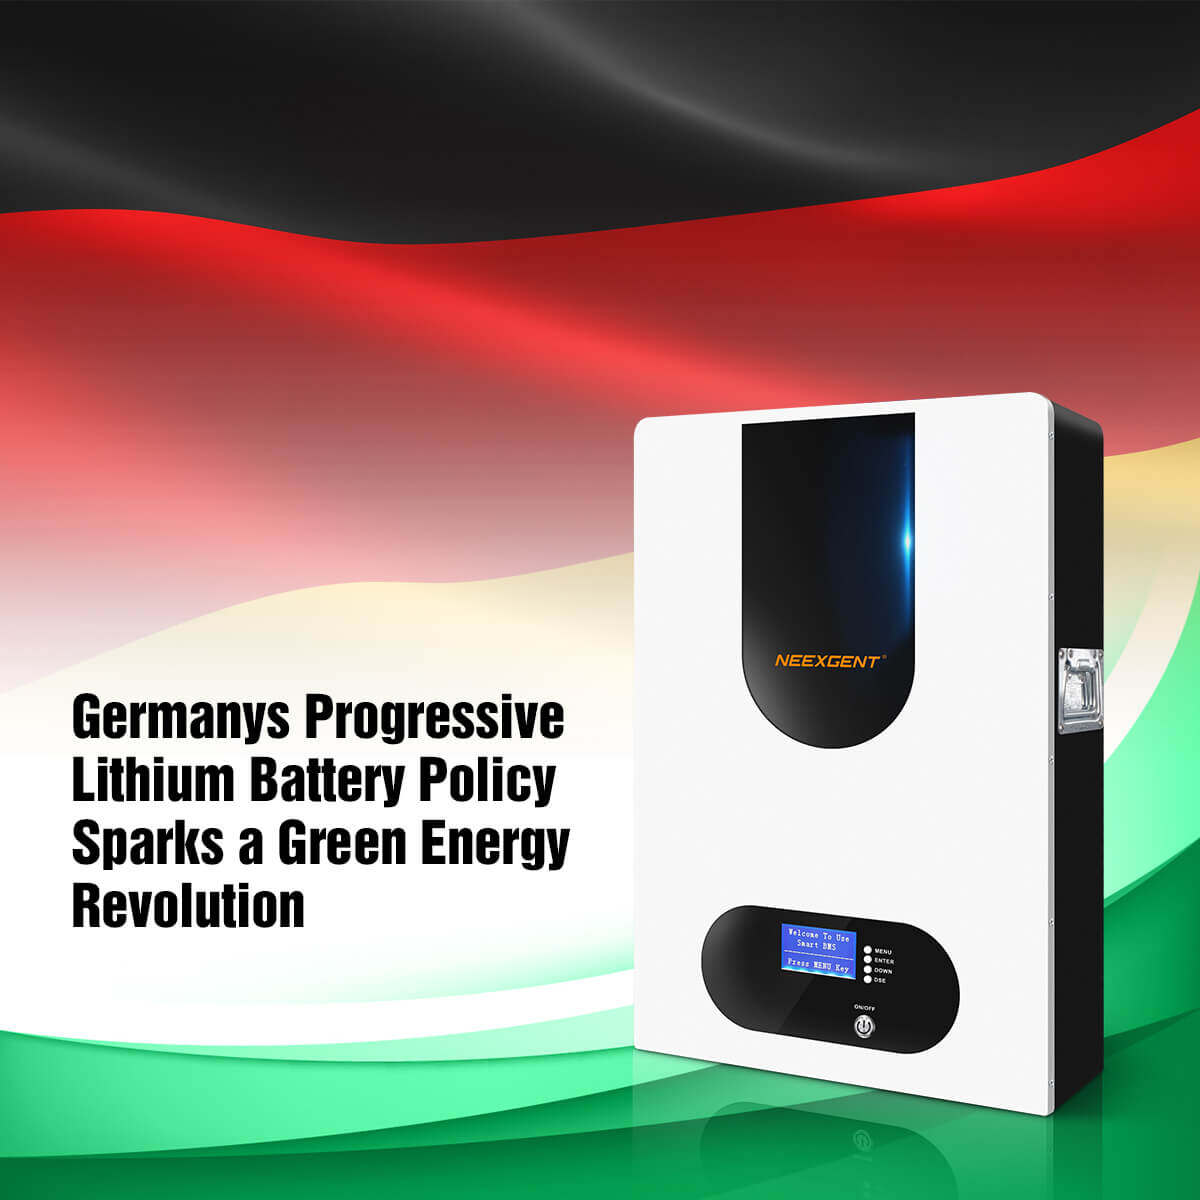 Germanys Progressive Lithium Battery Policy Sparks a Green Energy Revolution